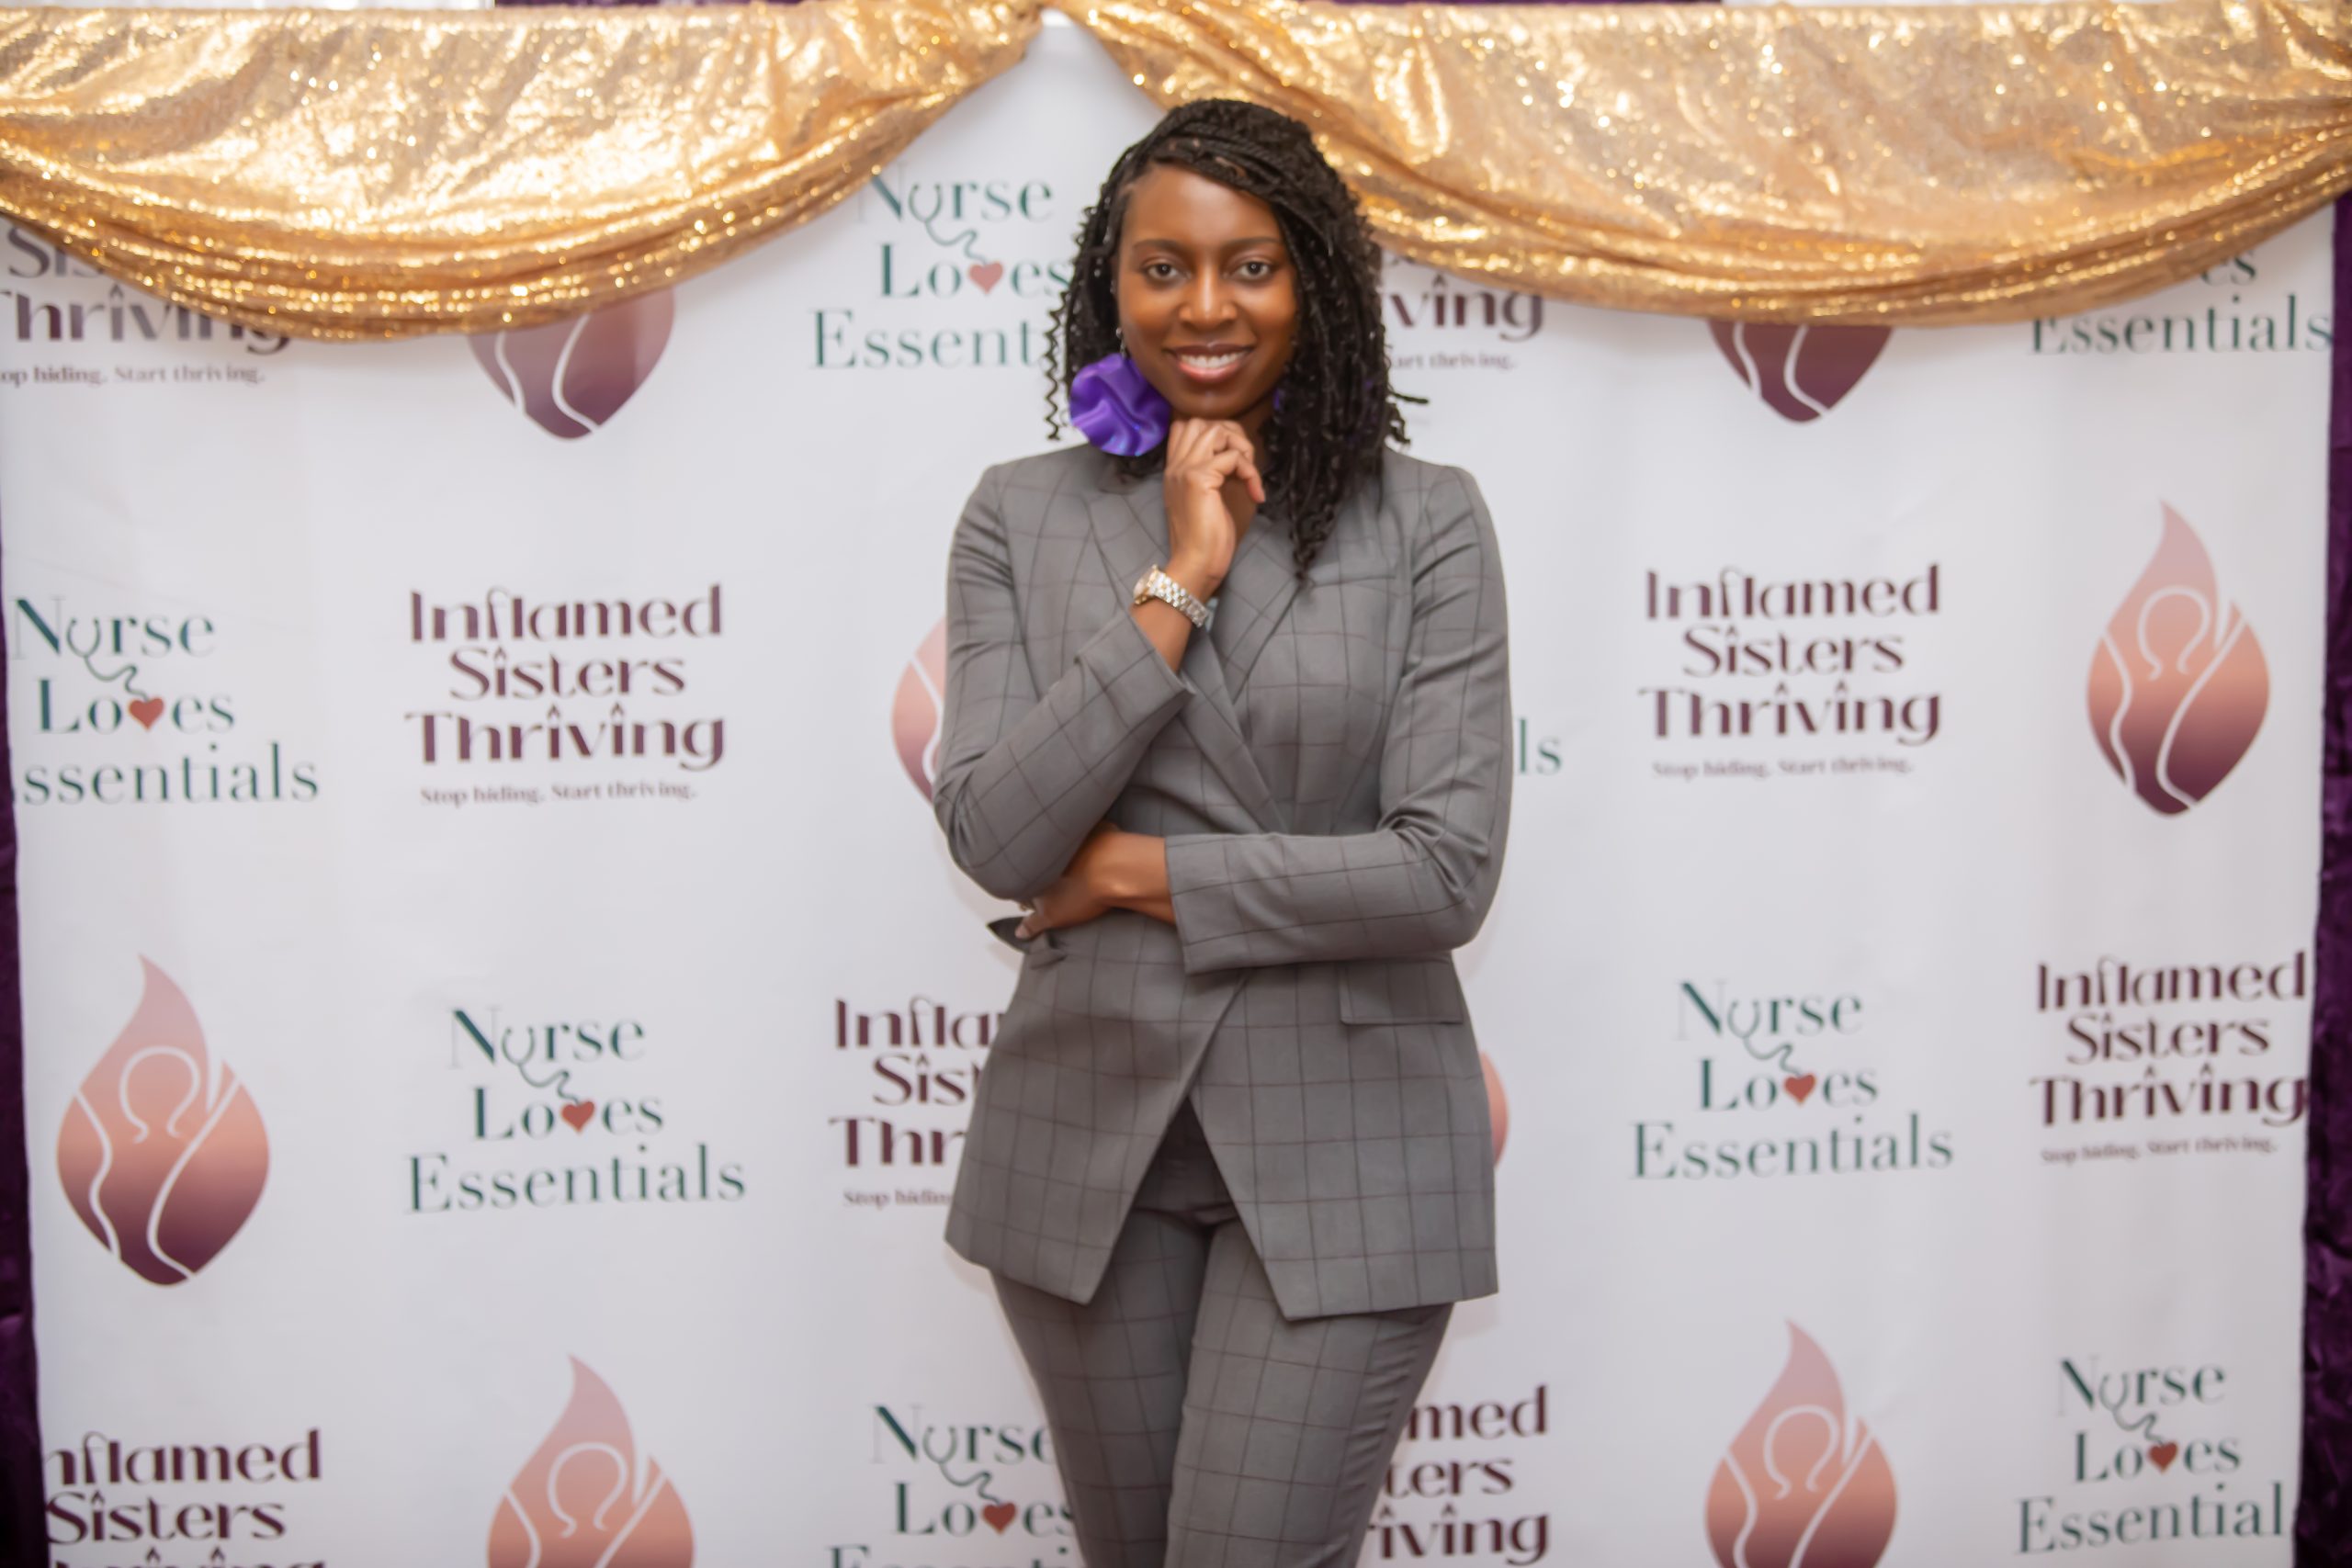 Catina Morrison, brown skinned professional woman with natural hair in grey suit with purple pinstripes standing by a banner with Nurse Loves Essentials LLC and Inflamed Sisters Thriving Inc.